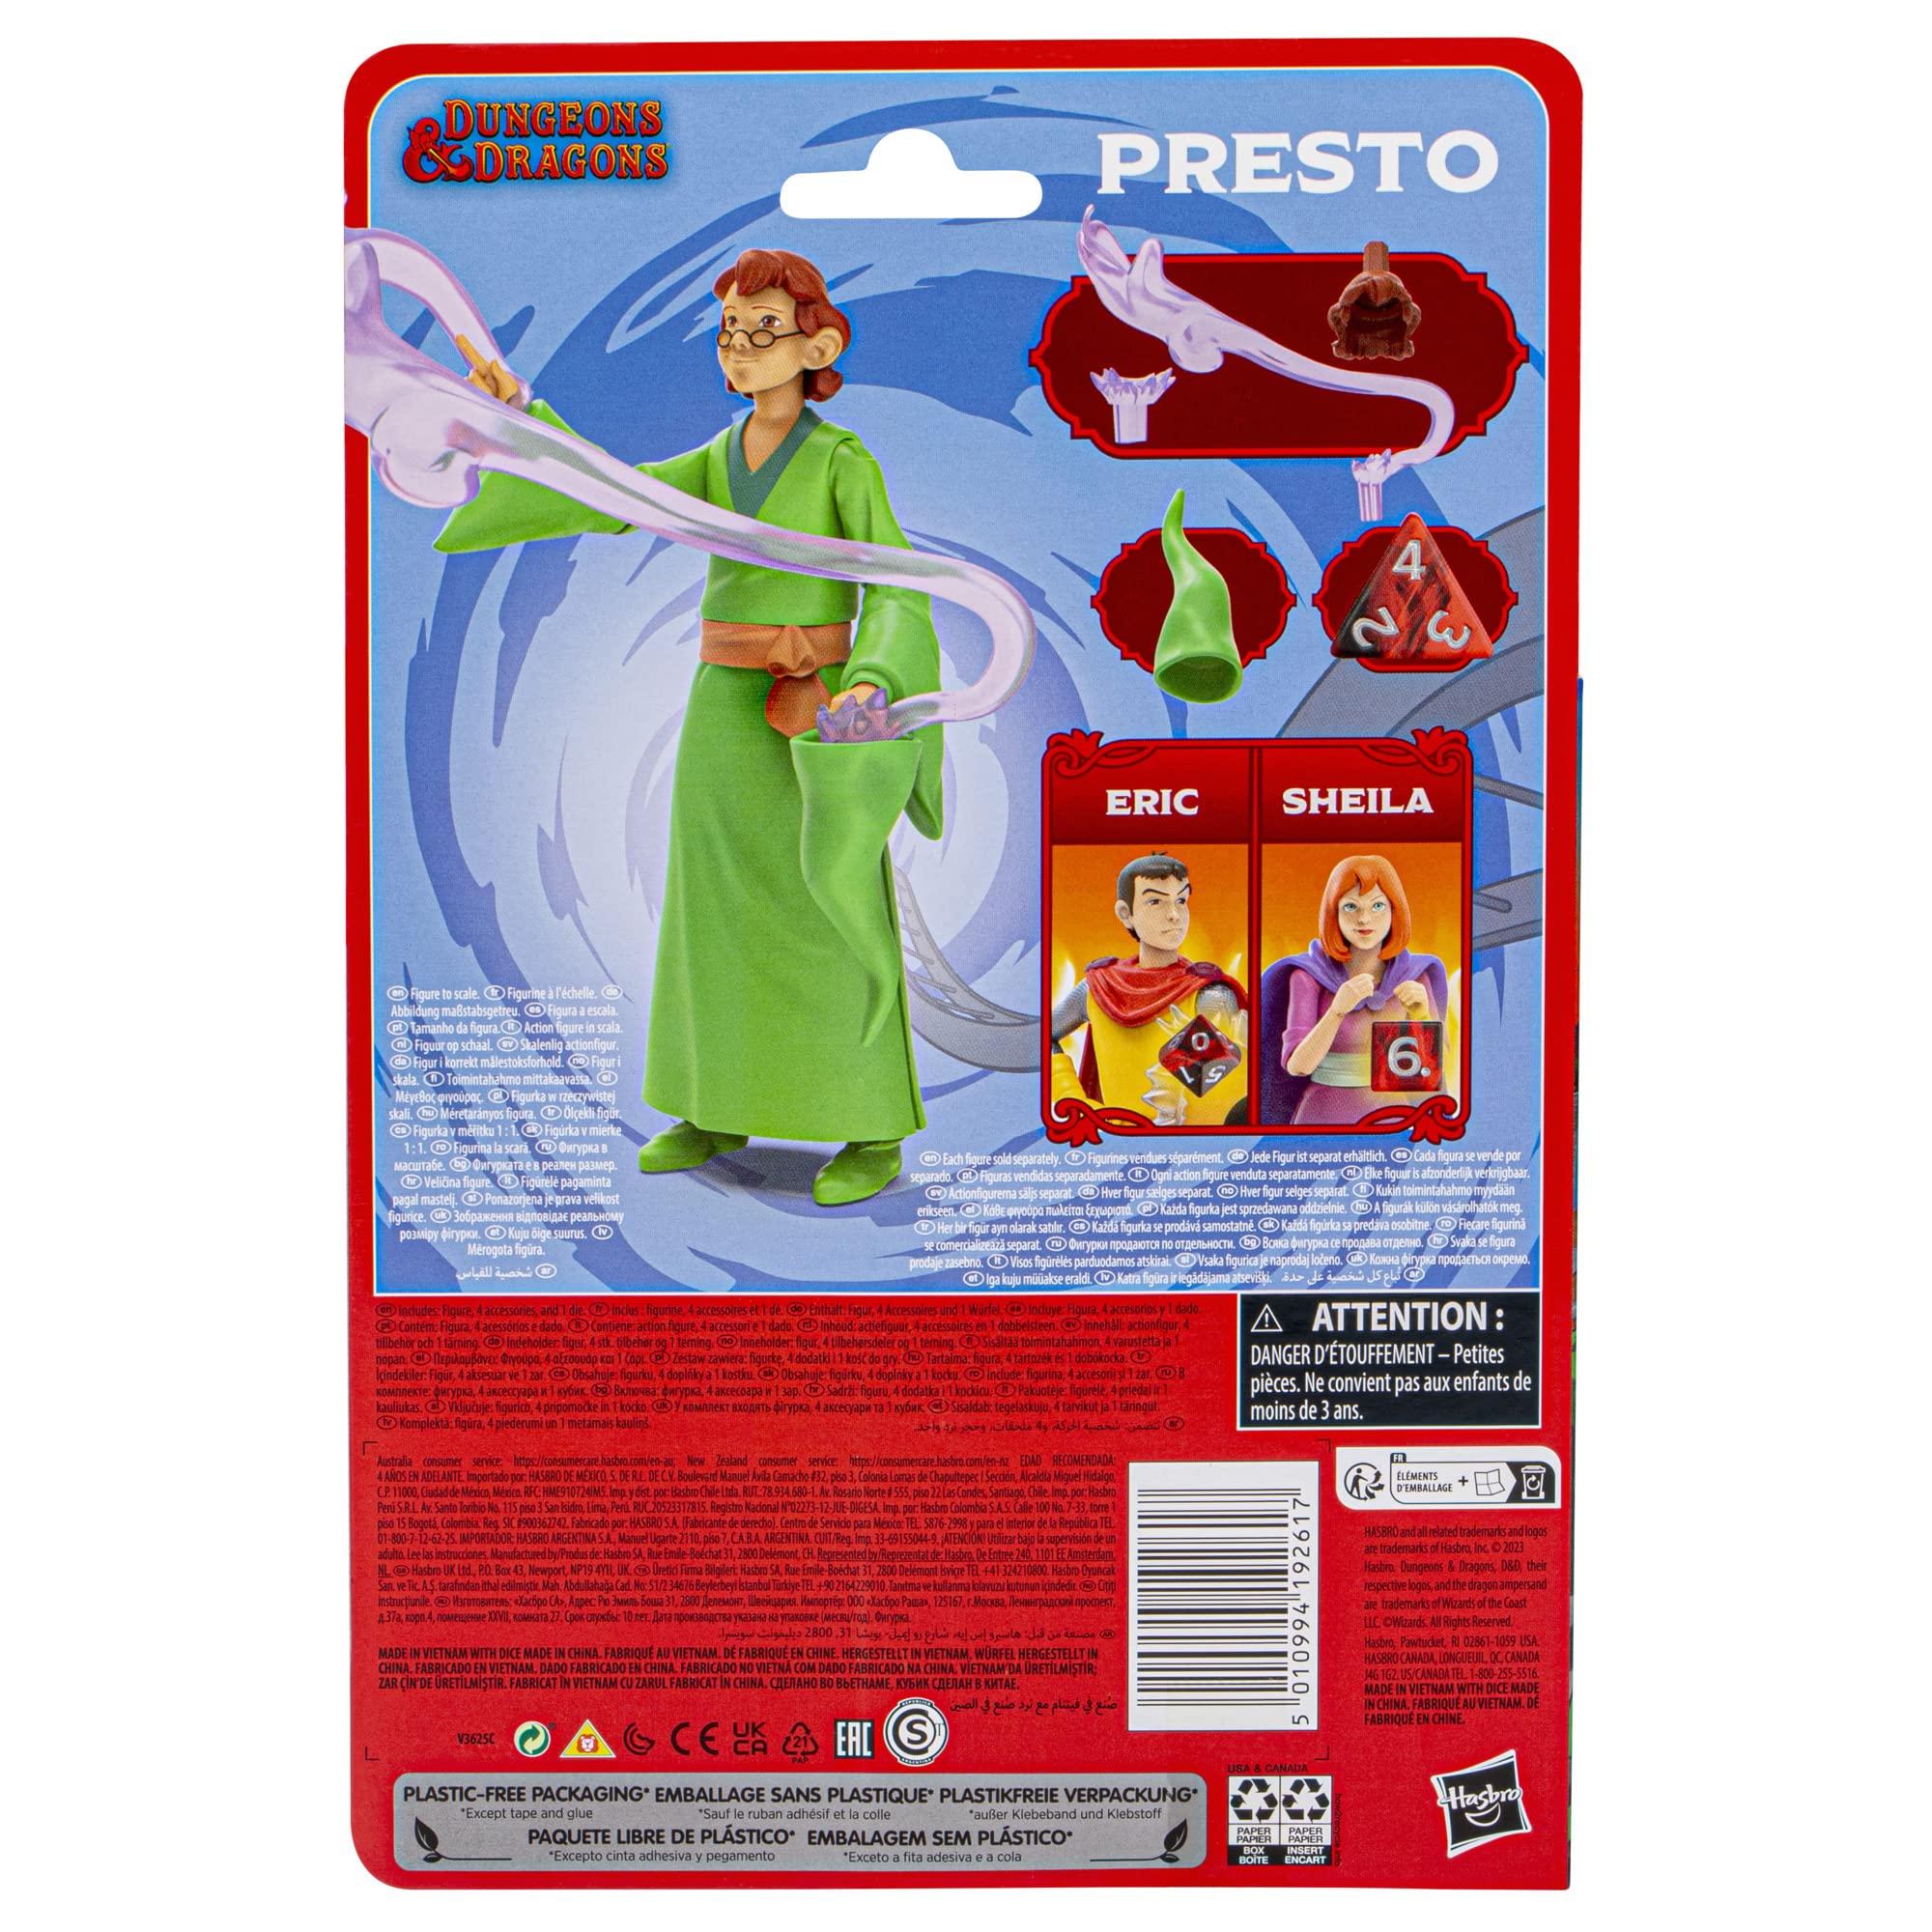 Dungeons & Dragons Cartoon Classics 6-Inch-Scale Presto Action Figure, D&D 80s Cartoon, Includes d4 from Exclusive D&D Dice Set